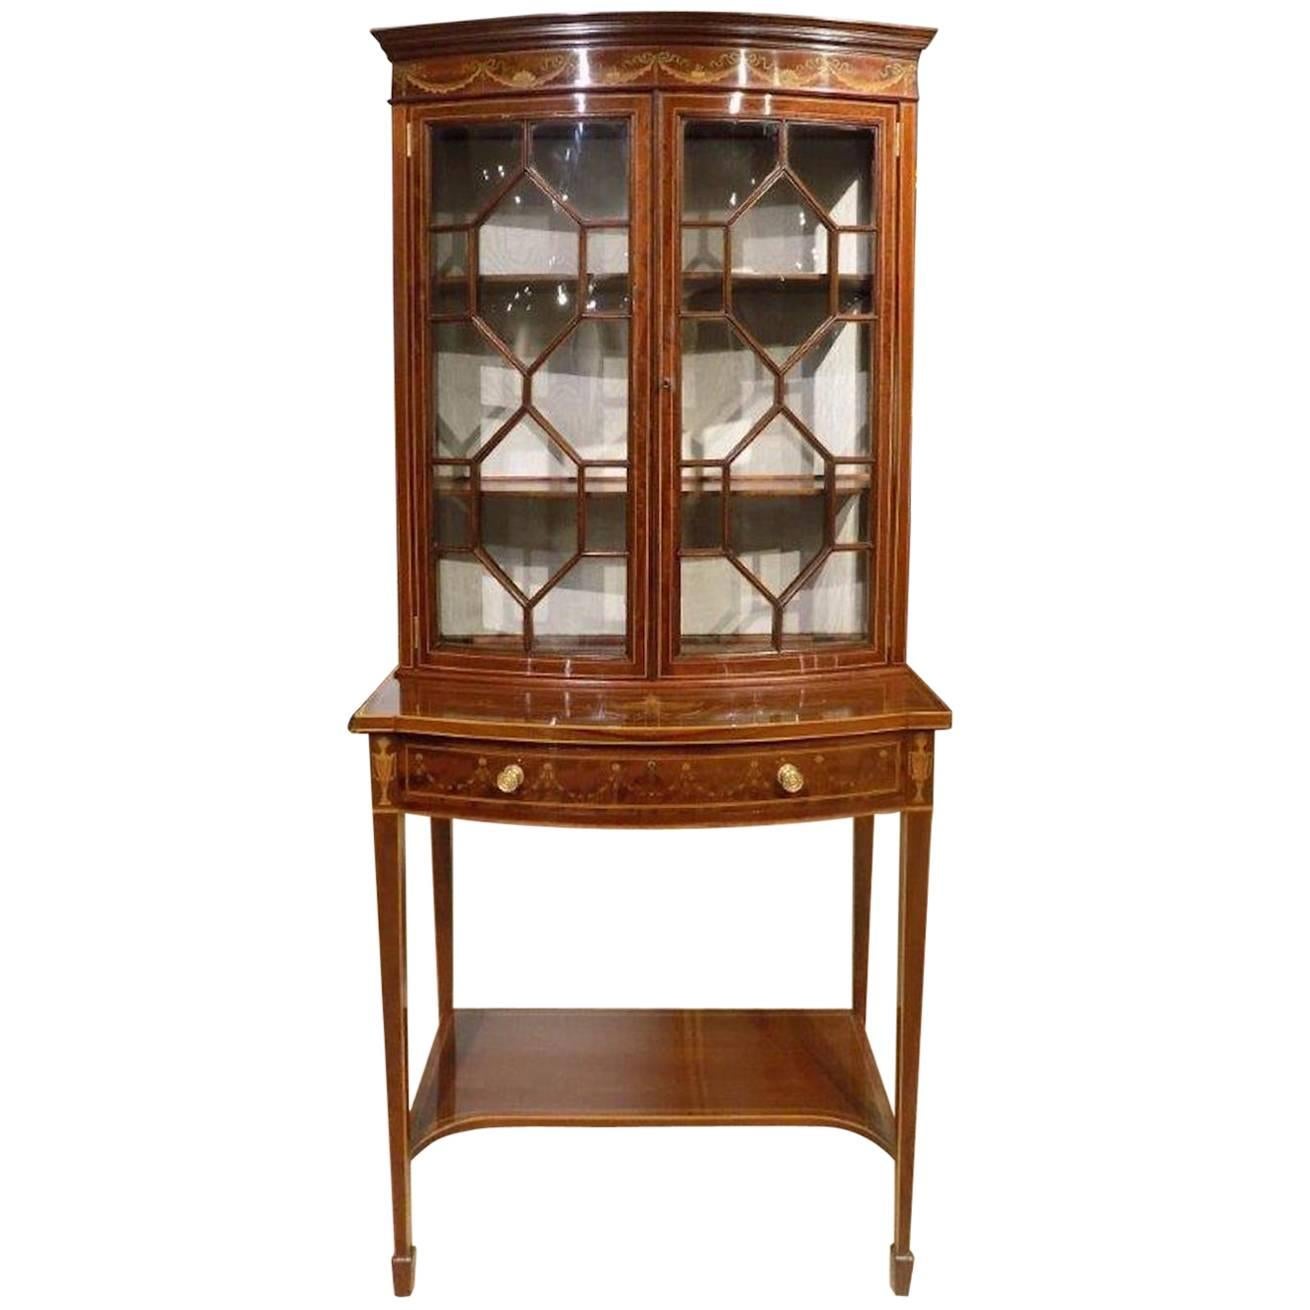 Superb Quality Mahogany and Marquetry Inlaid Bow Front Cabinet on Stand